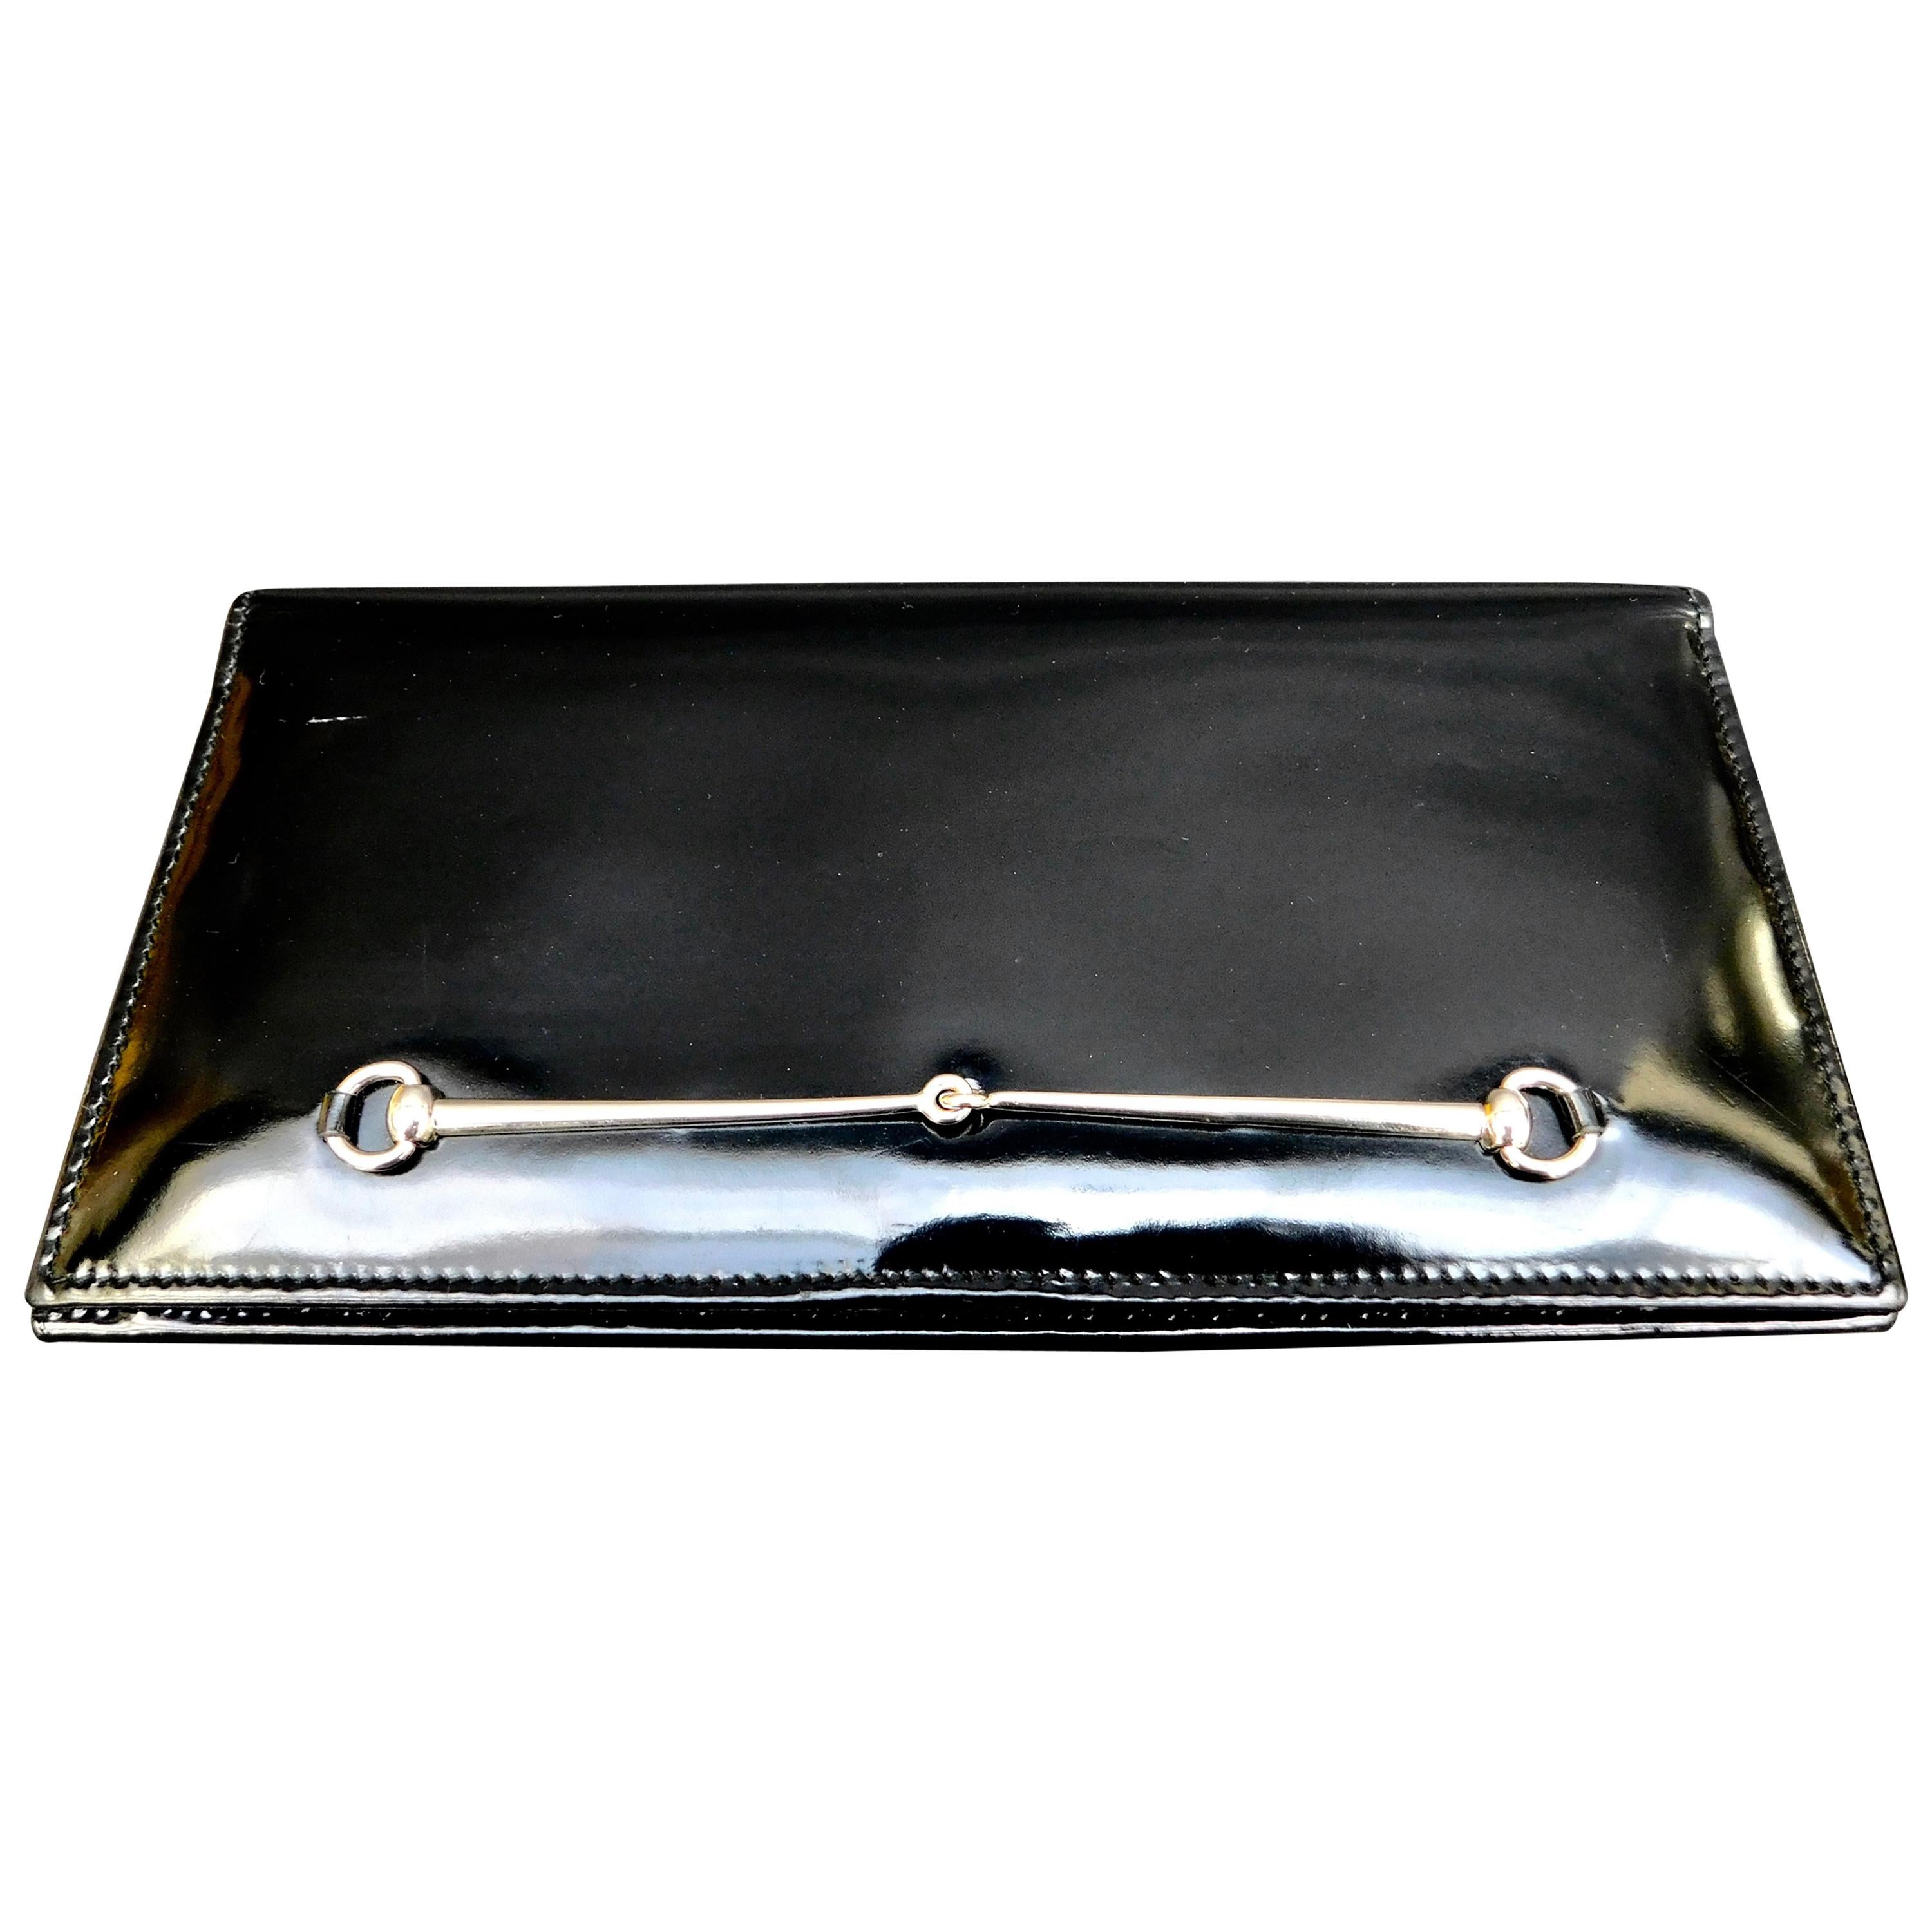 Vintage Gucci Black Leather Wallet With Silver Horse Bit